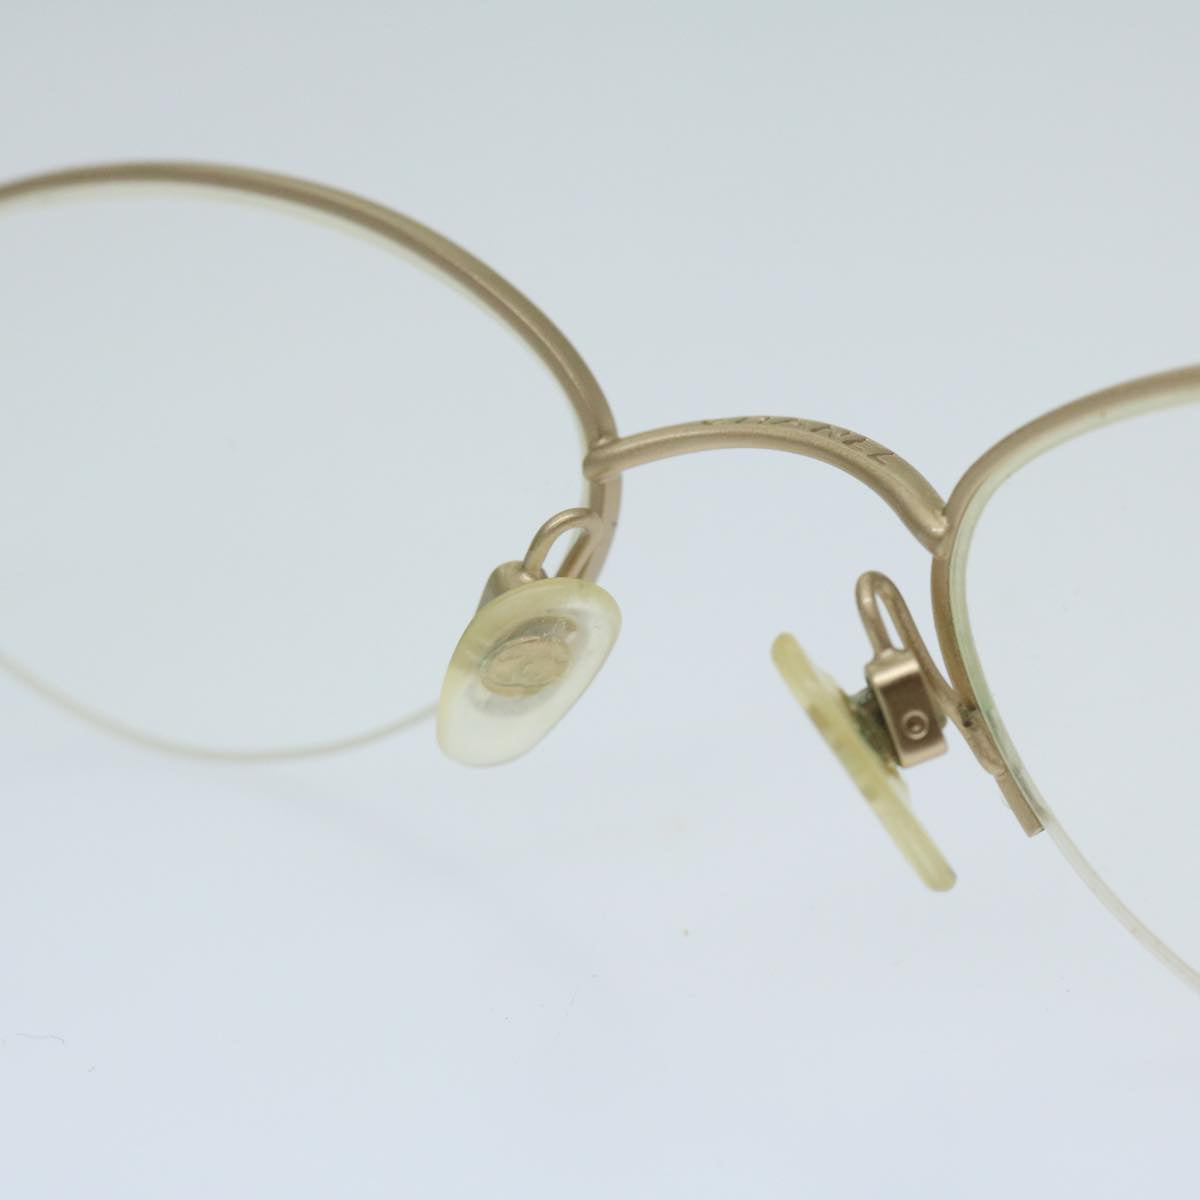 CHANEL Glasses metal Beige CC Auth bs11257